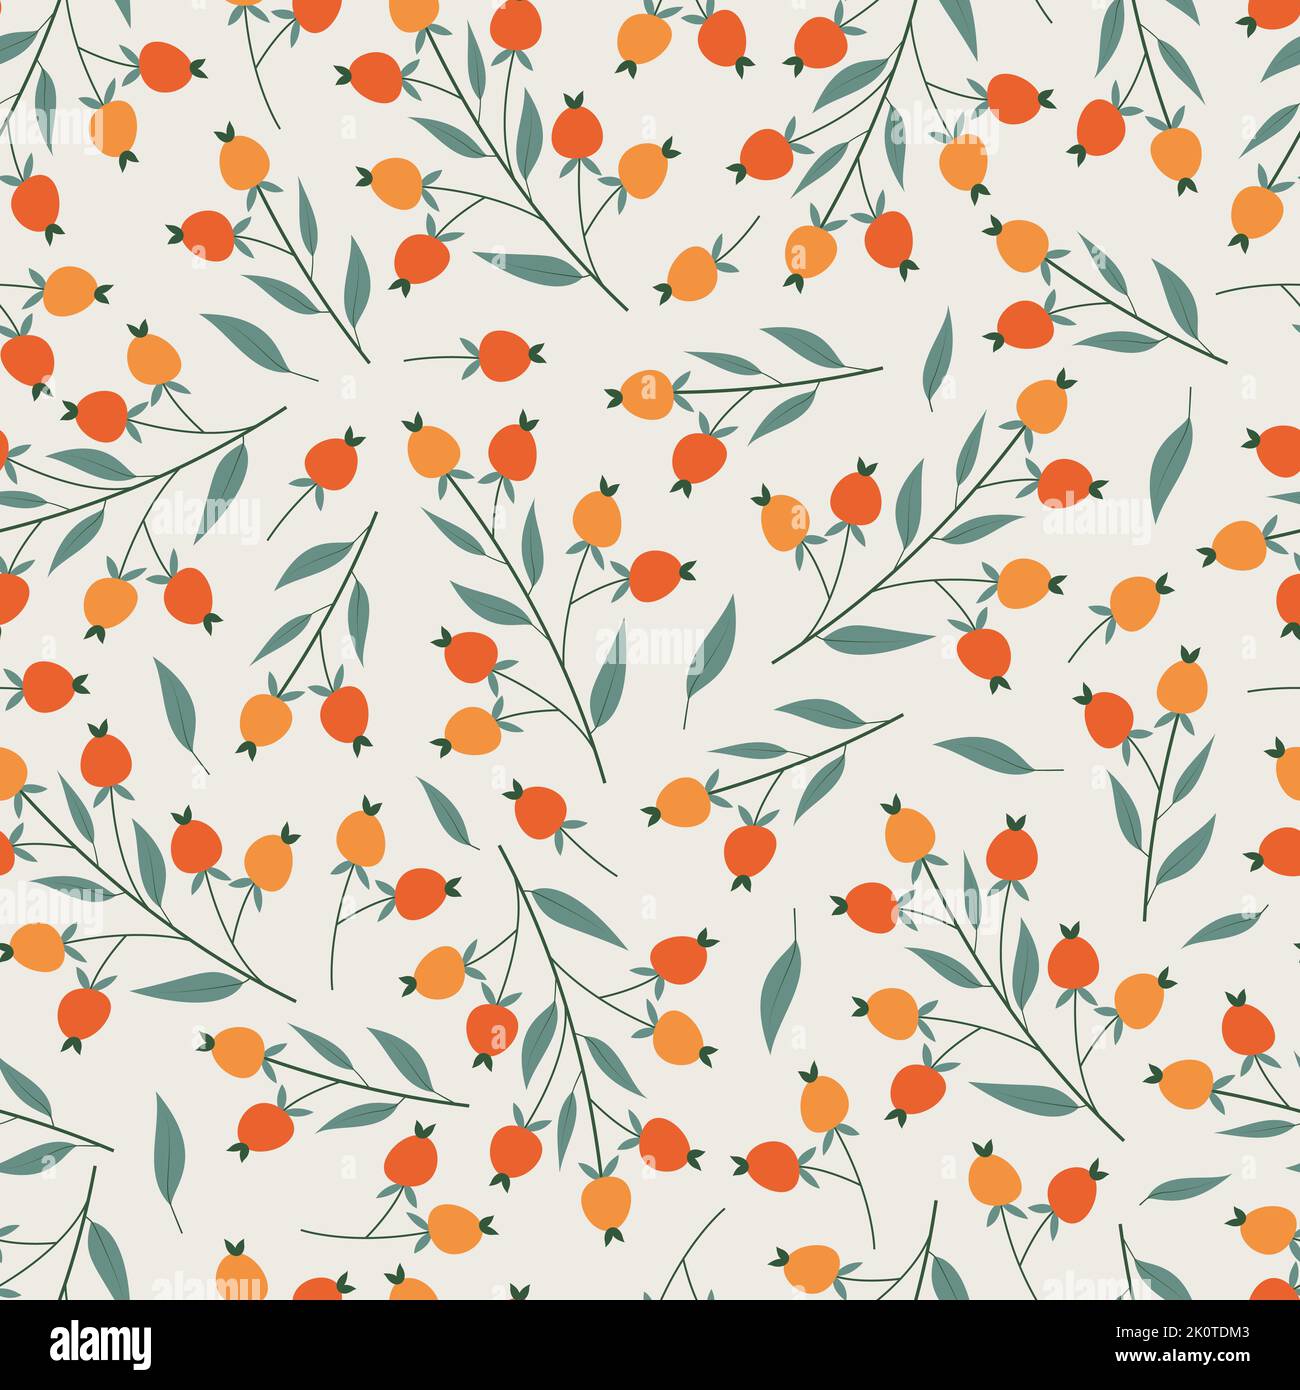 Floral seamless pattern design. Abstract branches, leaves and seeds. Repeat texture foliage background for surface printing Stock Vector